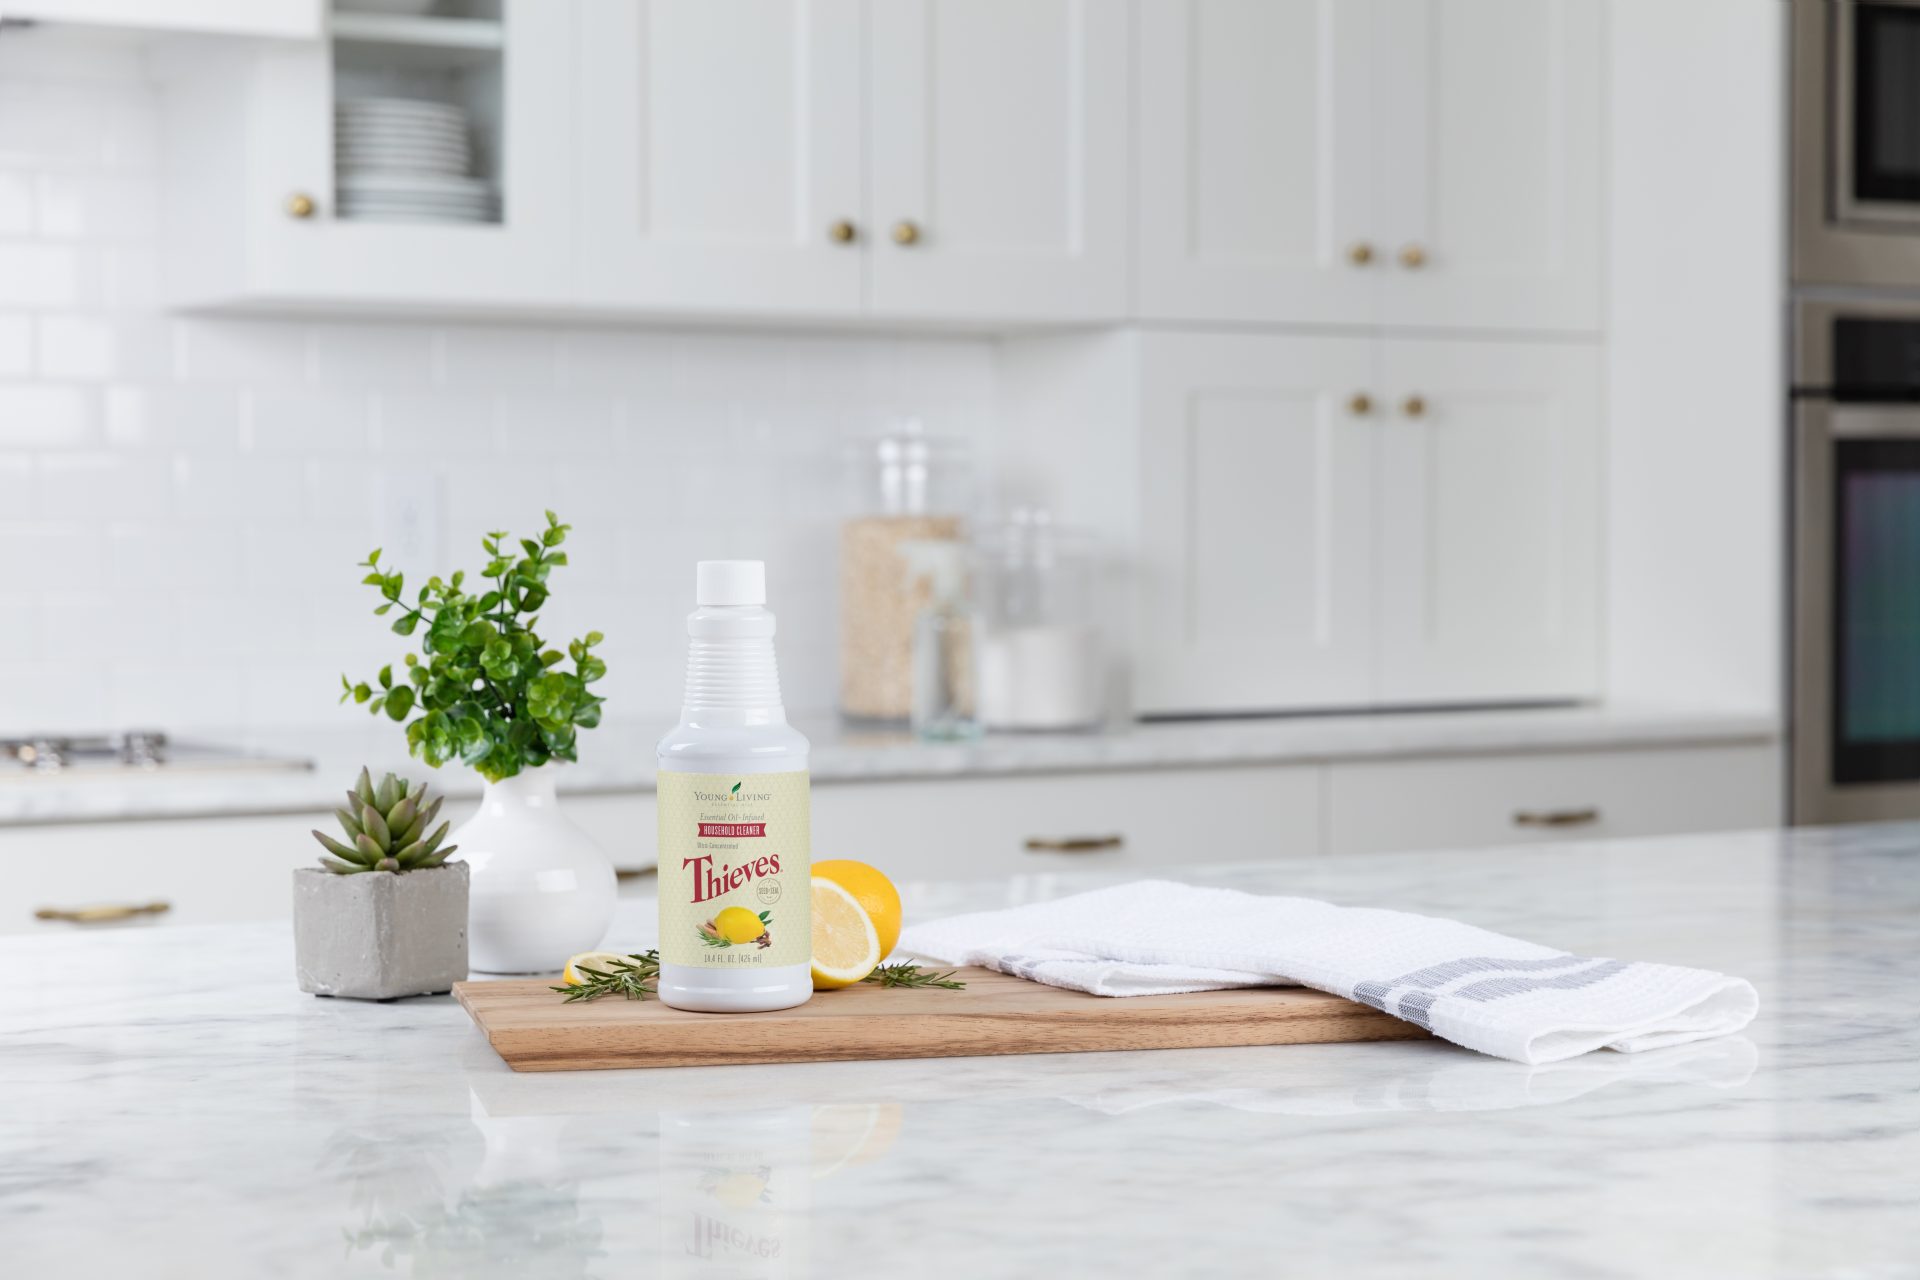 Thieves household cleaner on a marble kitchen counter